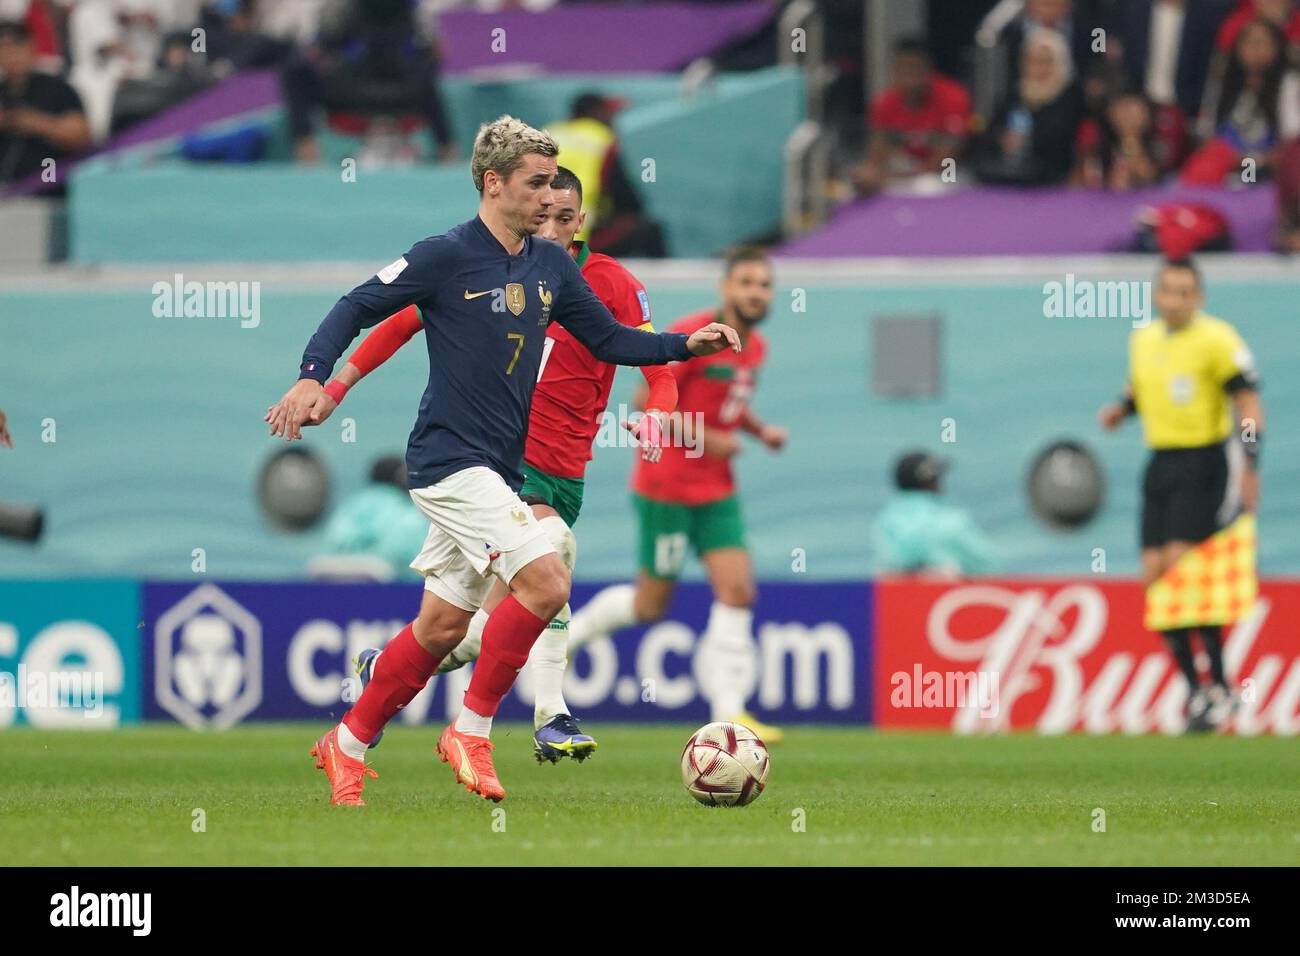 DOHA, QATAR - DECEMBER 14: Player of France Antoine Griezmann drives the ball during the FIFA World Cup Qatar 2022 Semi-finals match between France and Morocco at Al Bayt Stadium on December 14, 2022 in Al Khor, Qatar. (Photo by Florencia Tan Jun/PxImages) Credit: Px Images/Alamy Live News Stock Photo